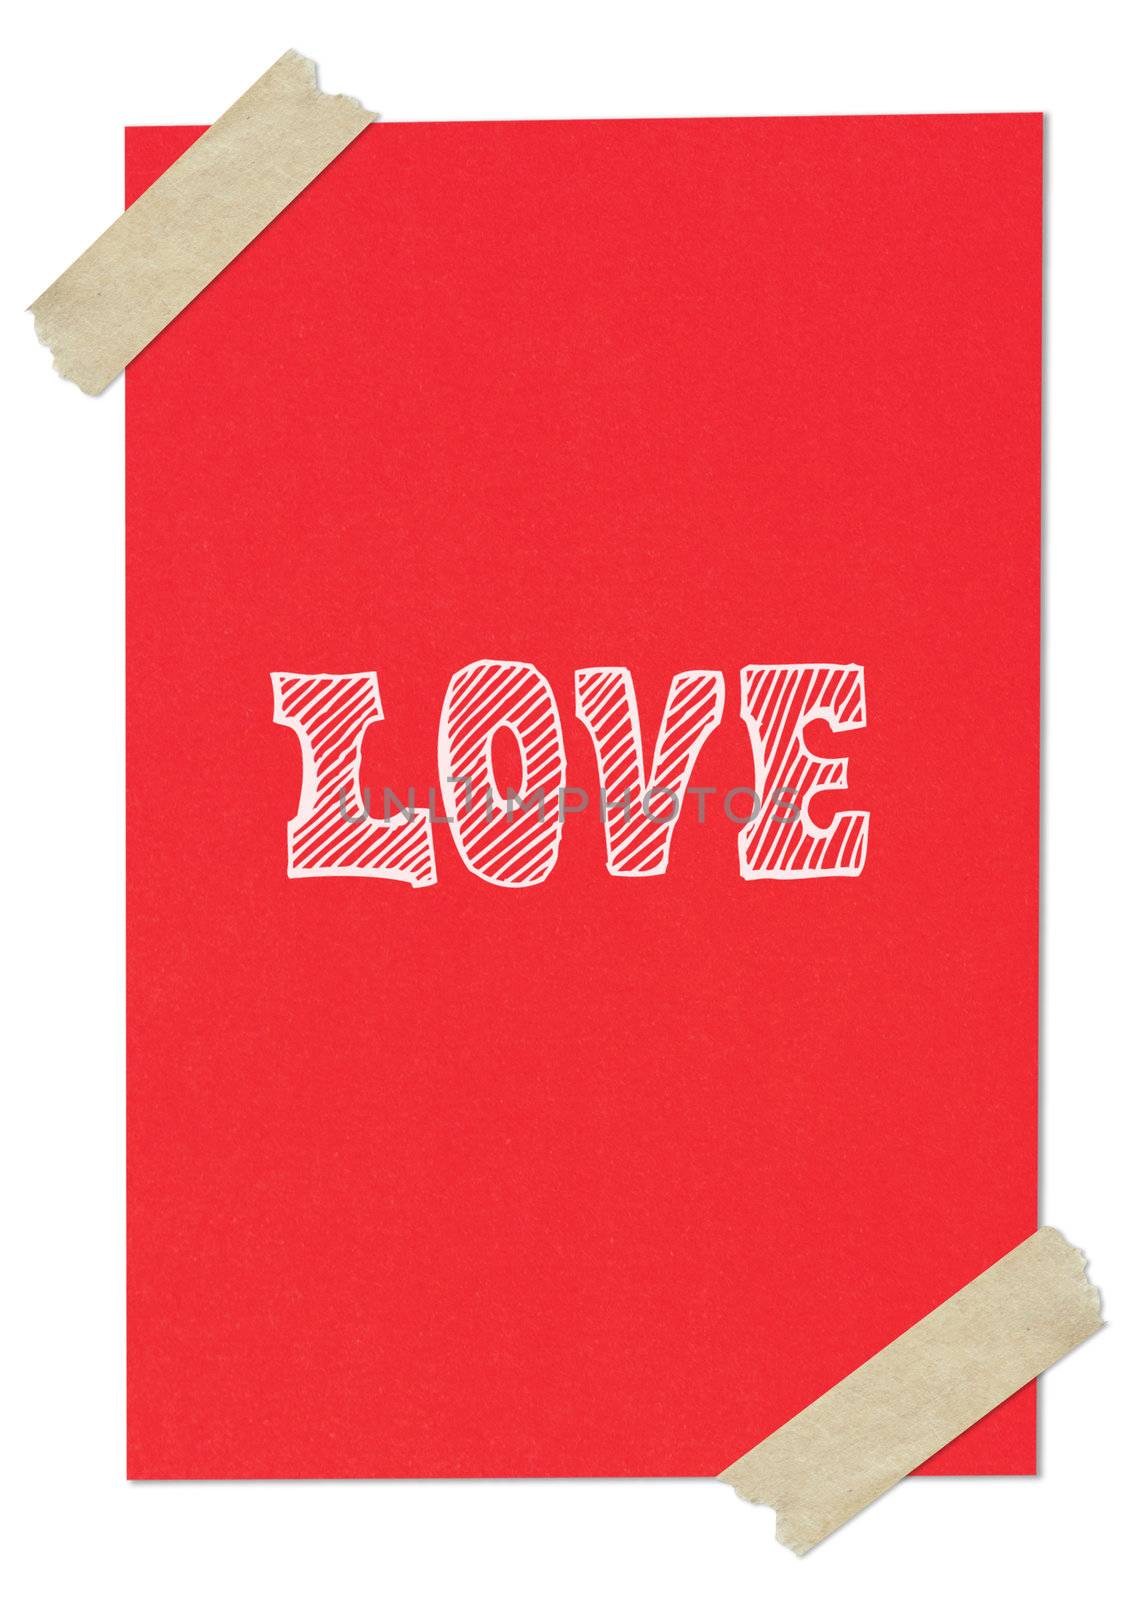 Handwriting love word on red paper with tape